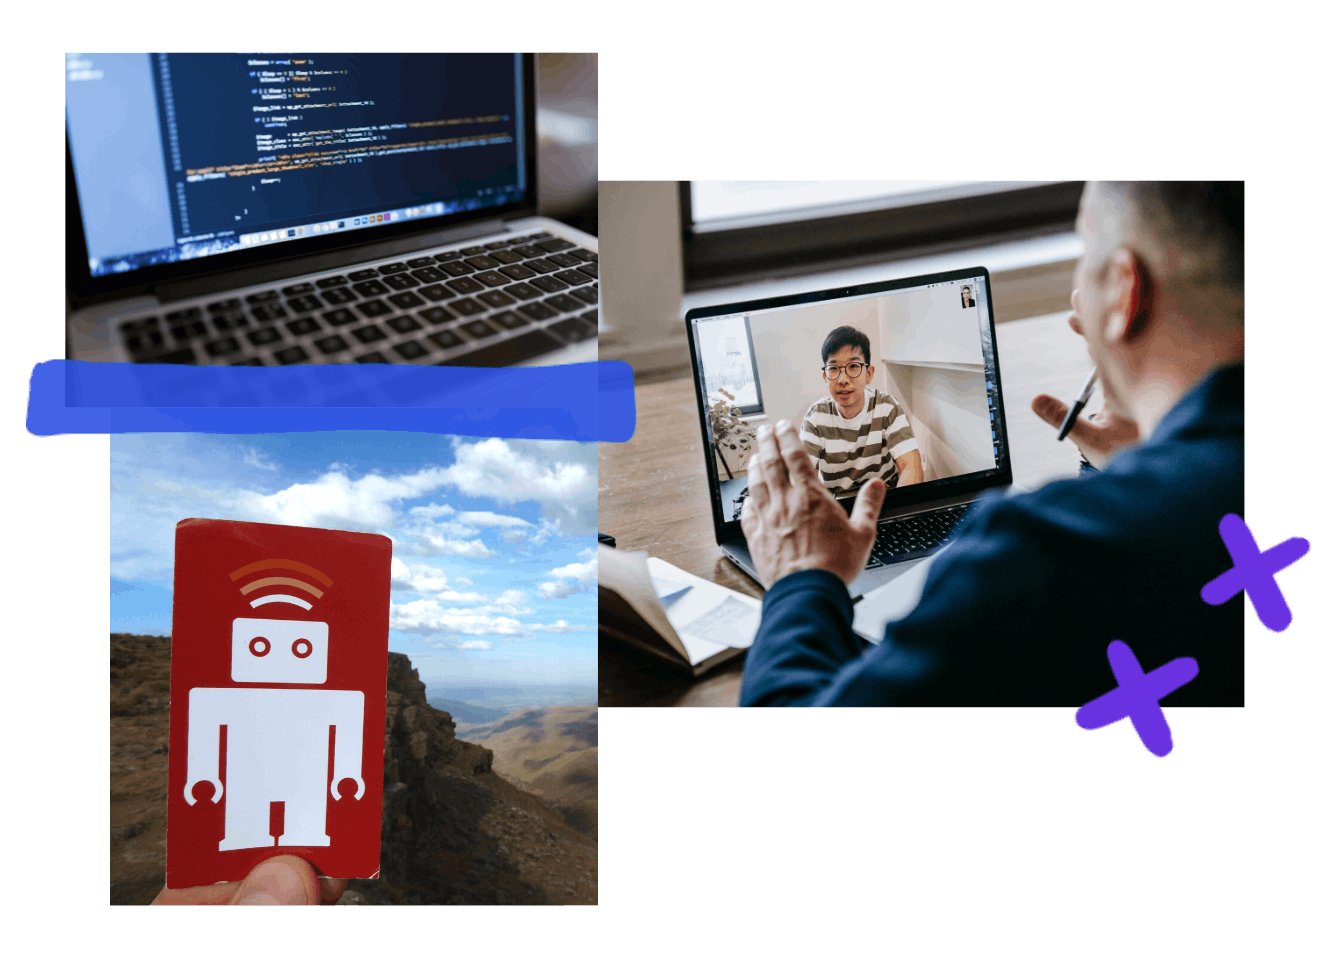 collage of 3 images: laptop with code written on the screen, video call between 2 people, and card with thoughtbot's mascot, Ralph